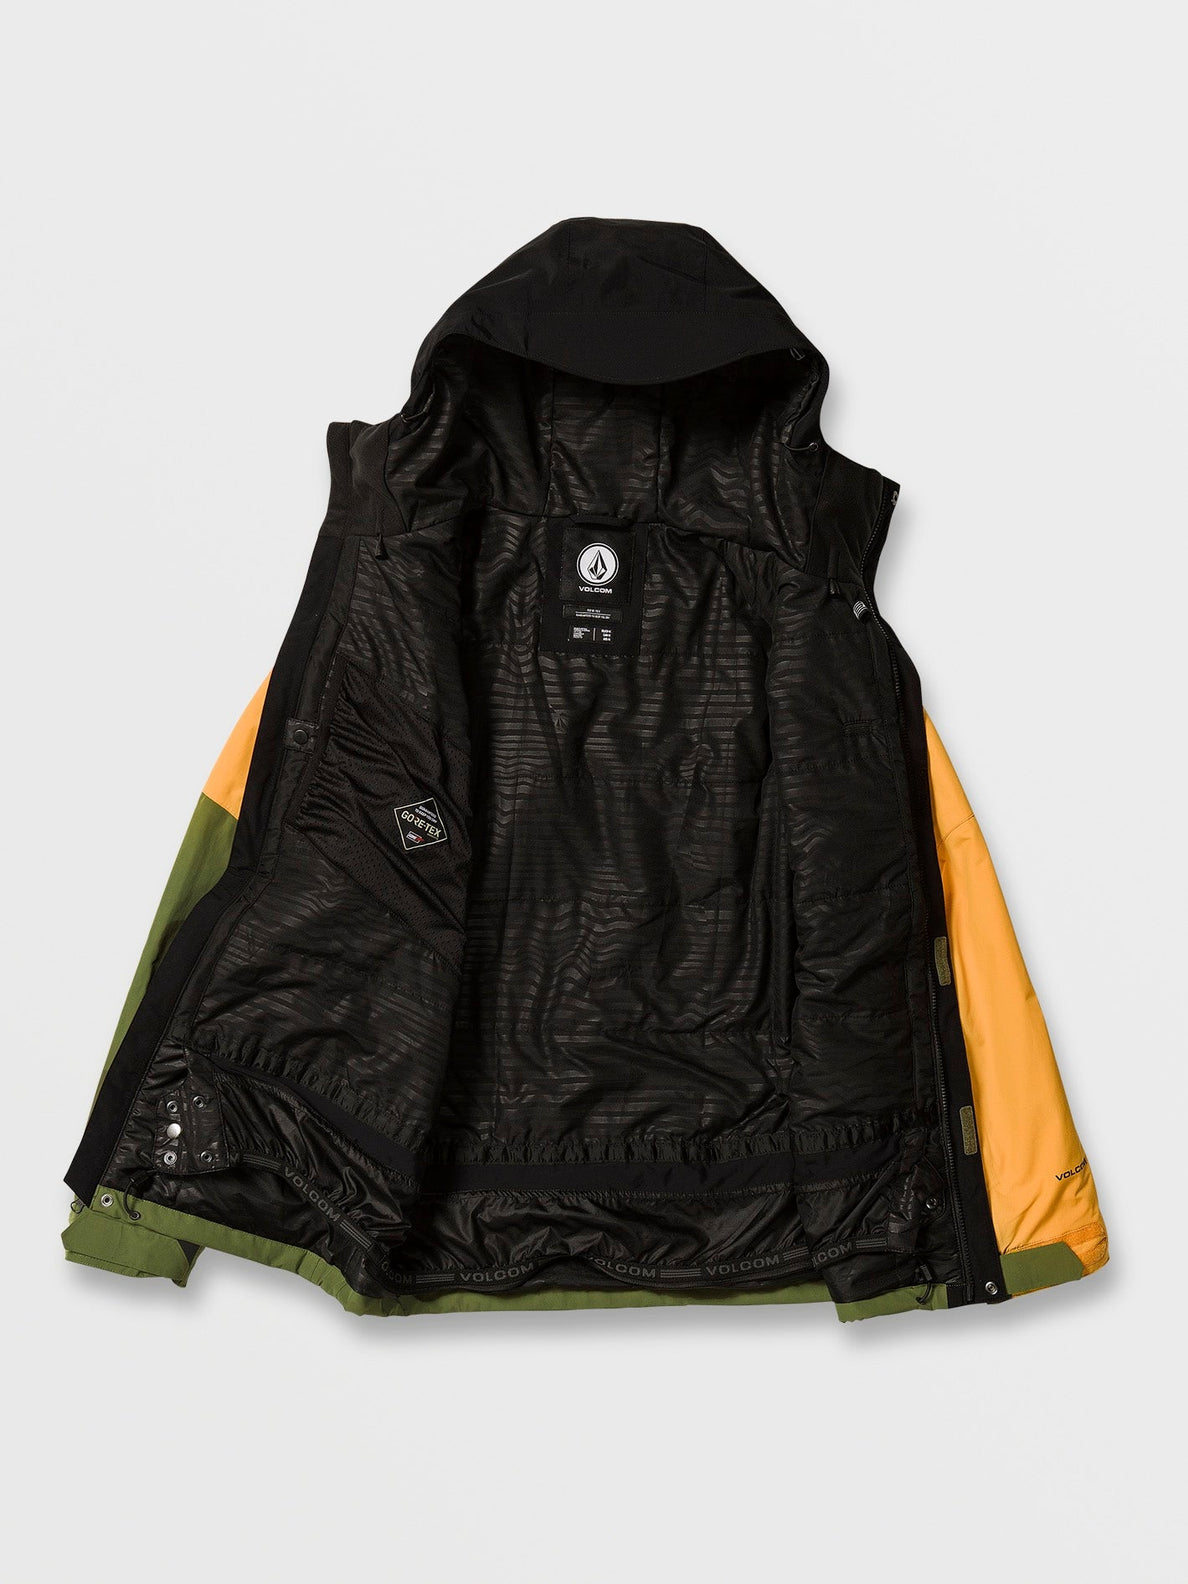 Mens L Insulated Gore-Tex Jacket - Gold – Volcom Japan